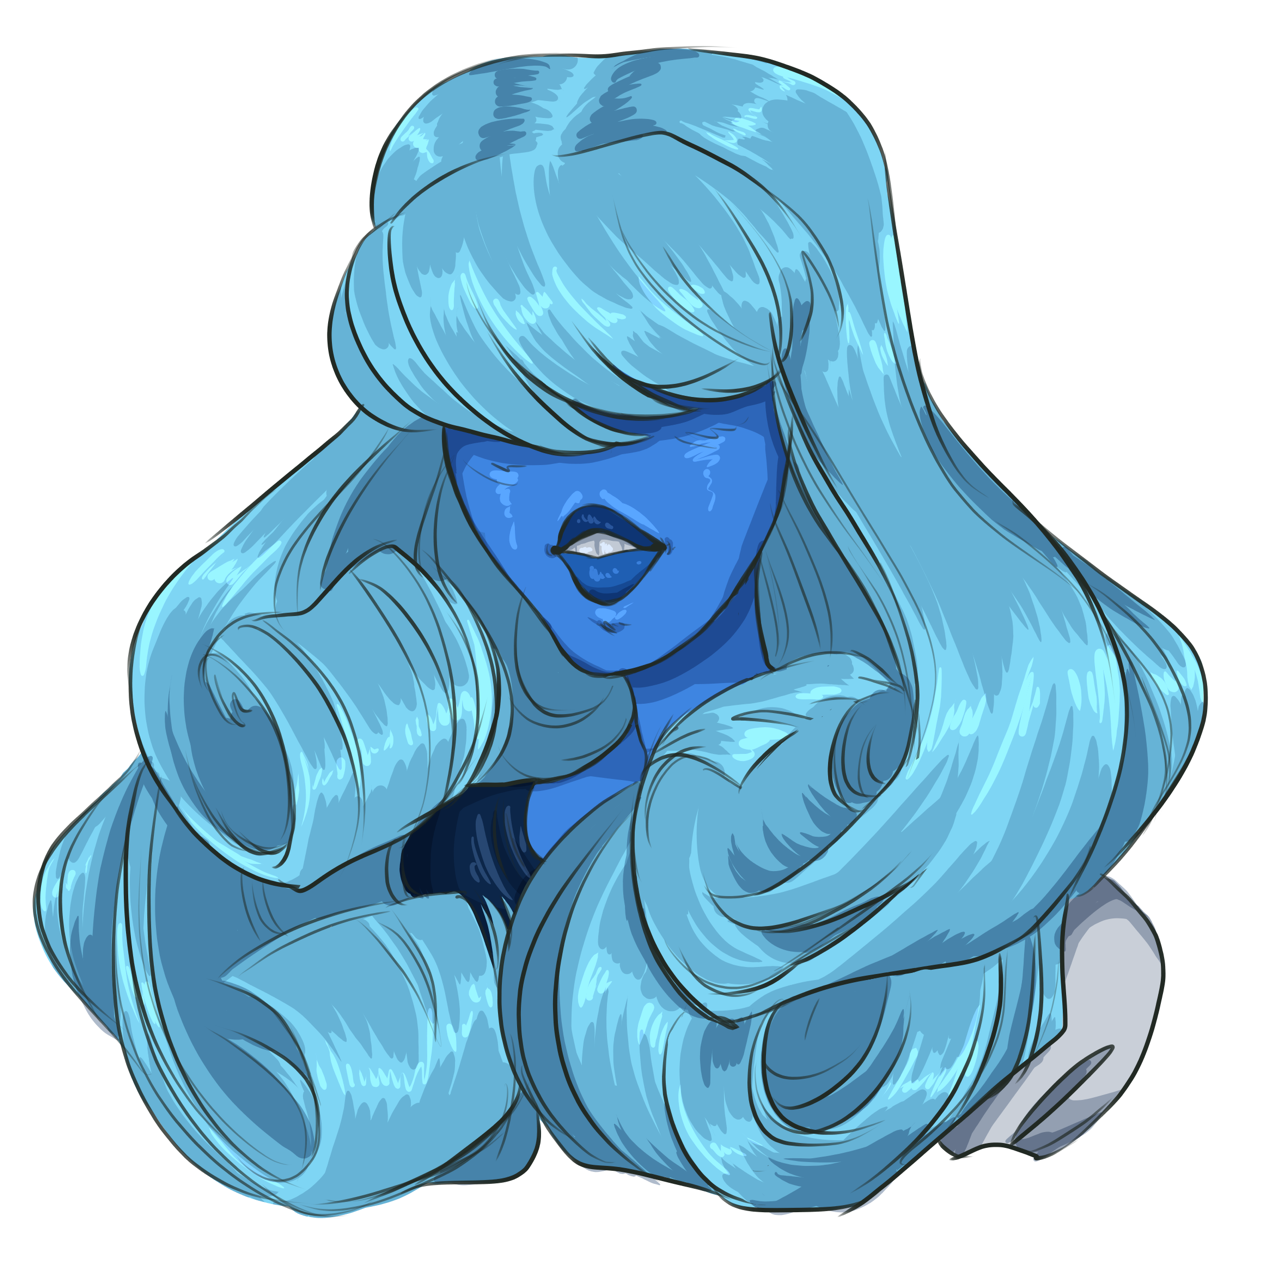 So I found a sketch I did a little while back that I thought would be nice to do digitally and it’s the lovely Sapphire. Her hair looked really nice and I wanted to go further with it. I really like...